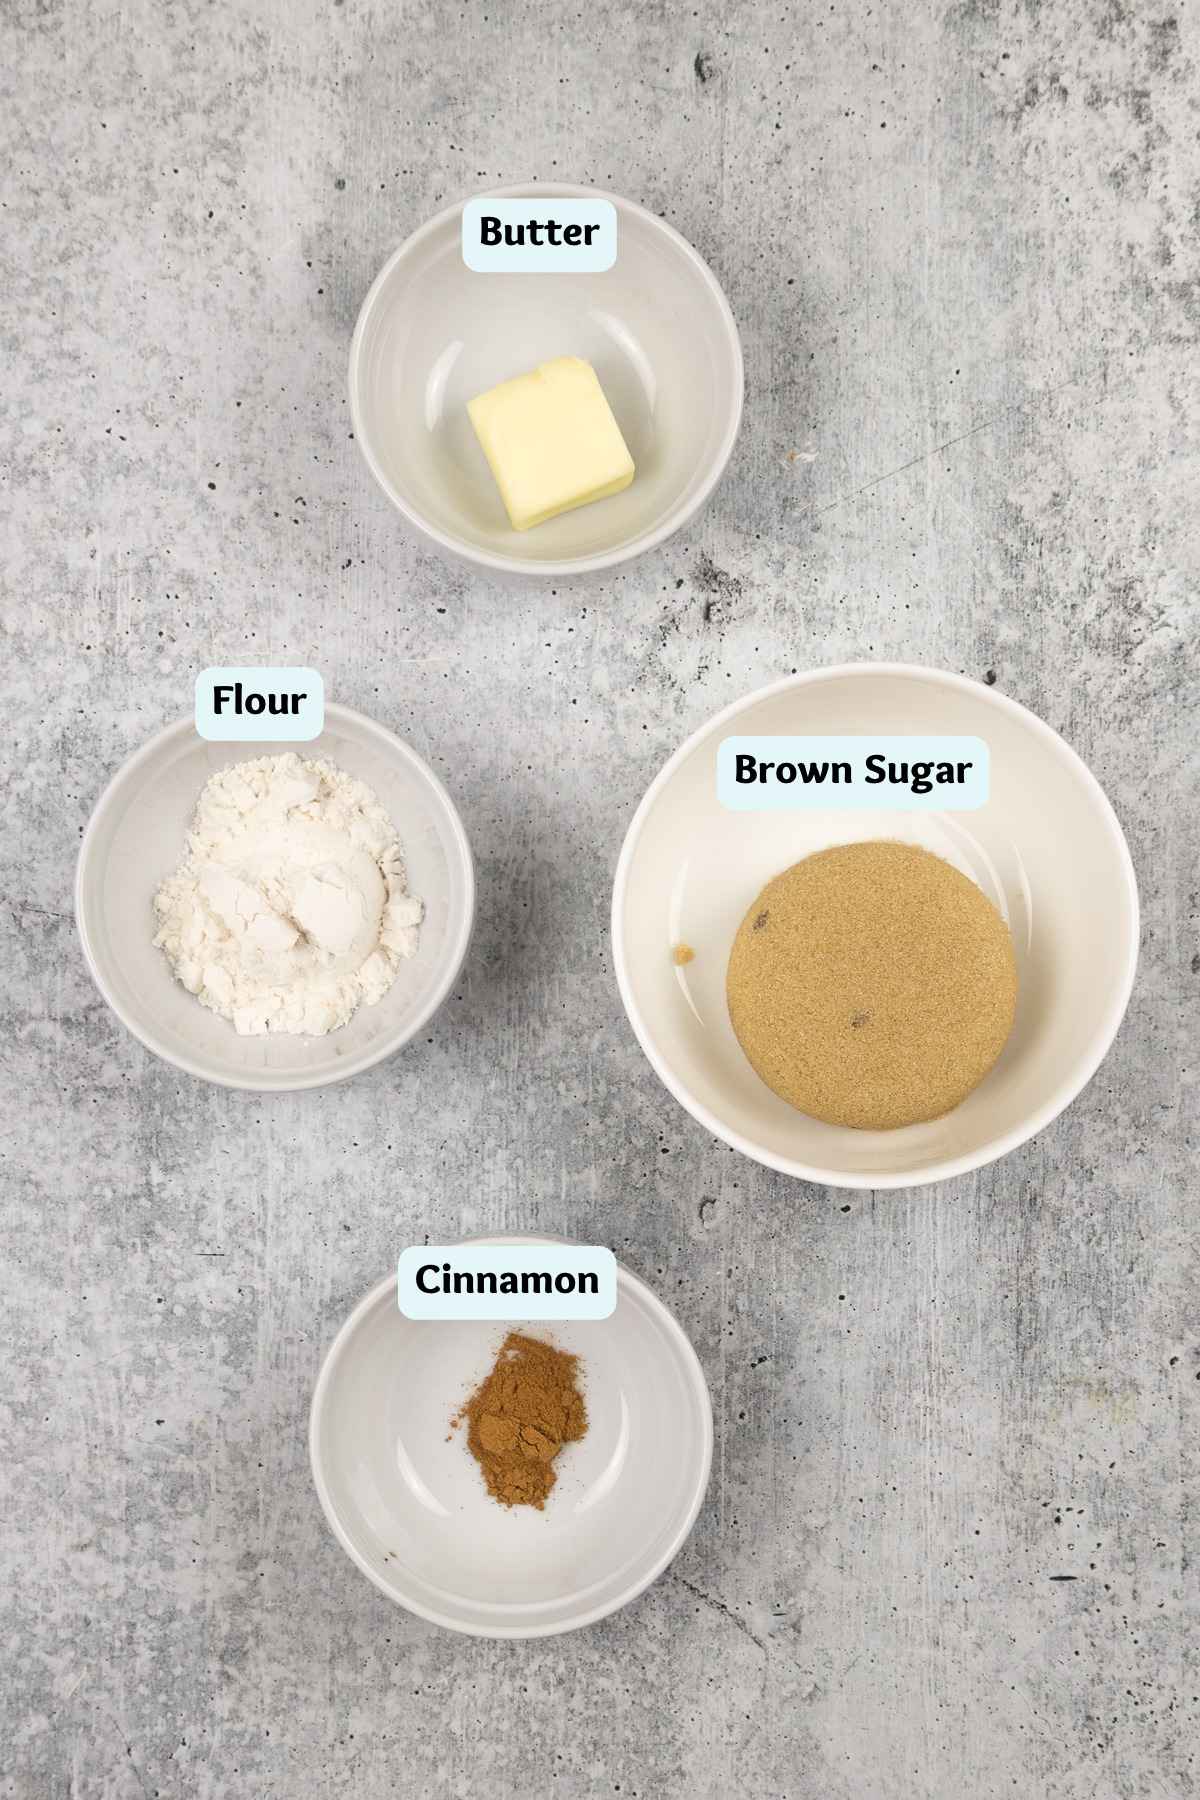 Ingredients for crumble topping